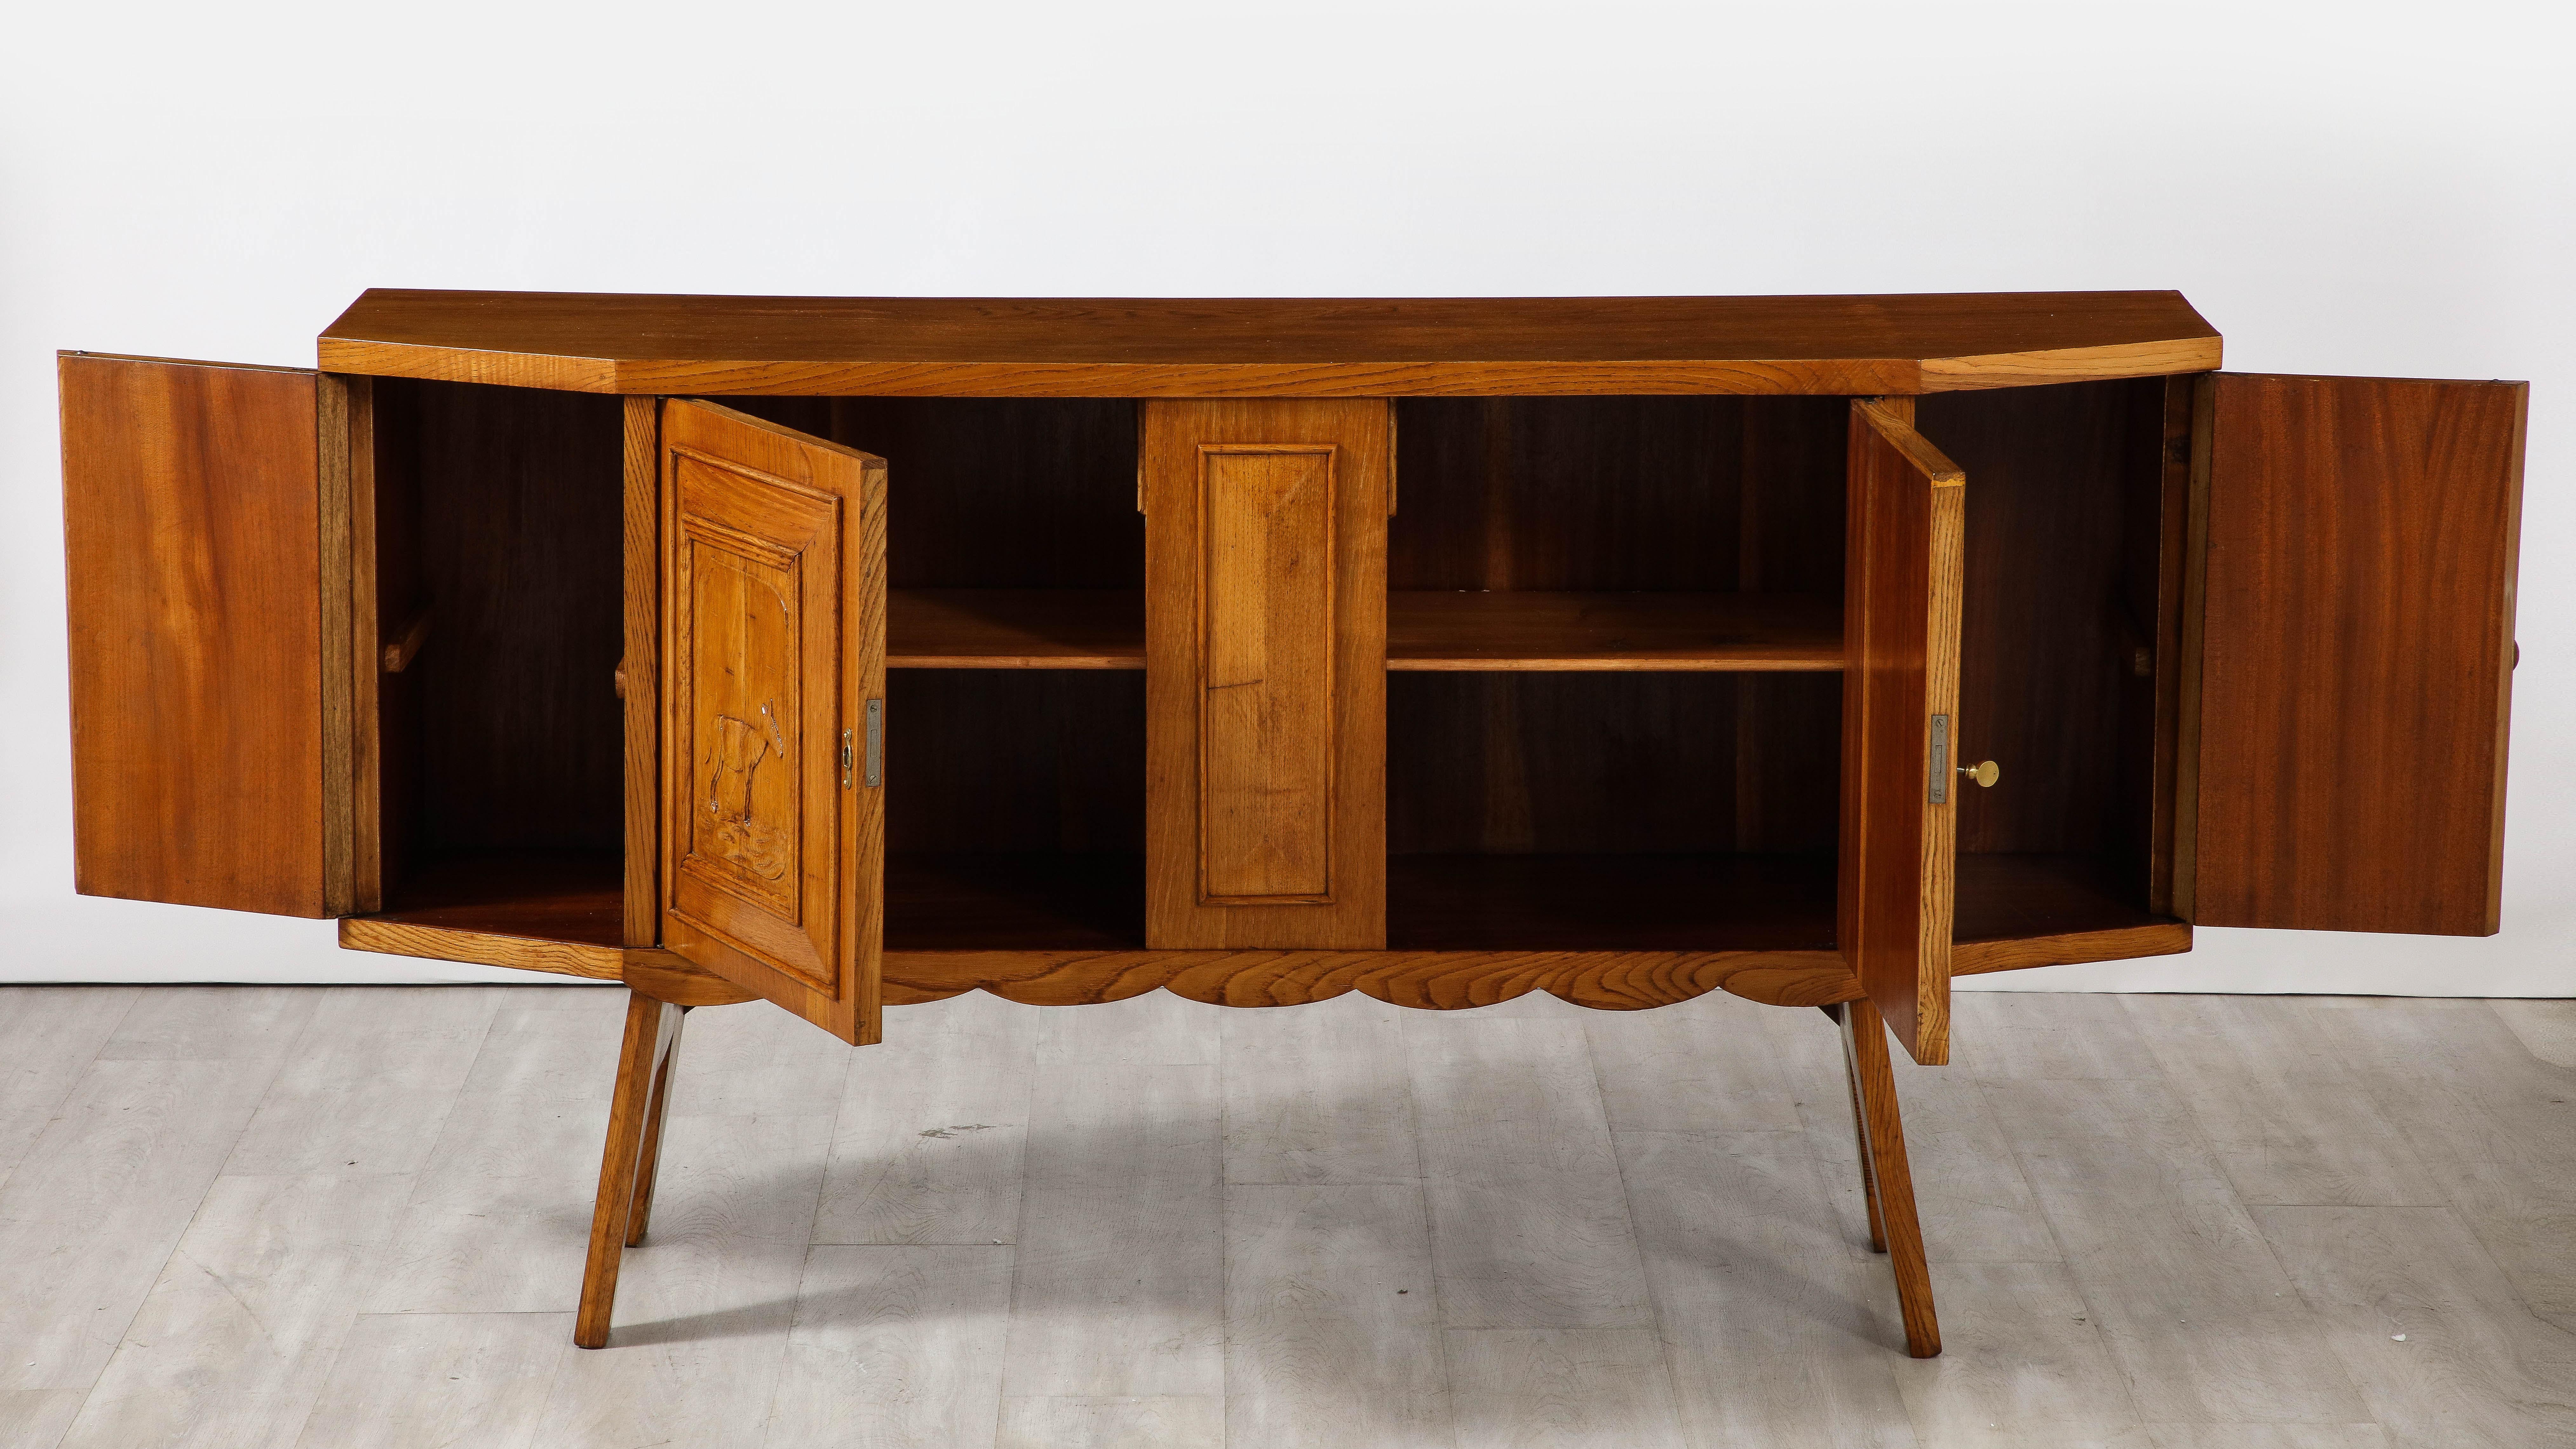 Hand-Carved Italian Tuscan Art Deco Carved Oak Sideboard or Credenza, circa 1940 For Sale